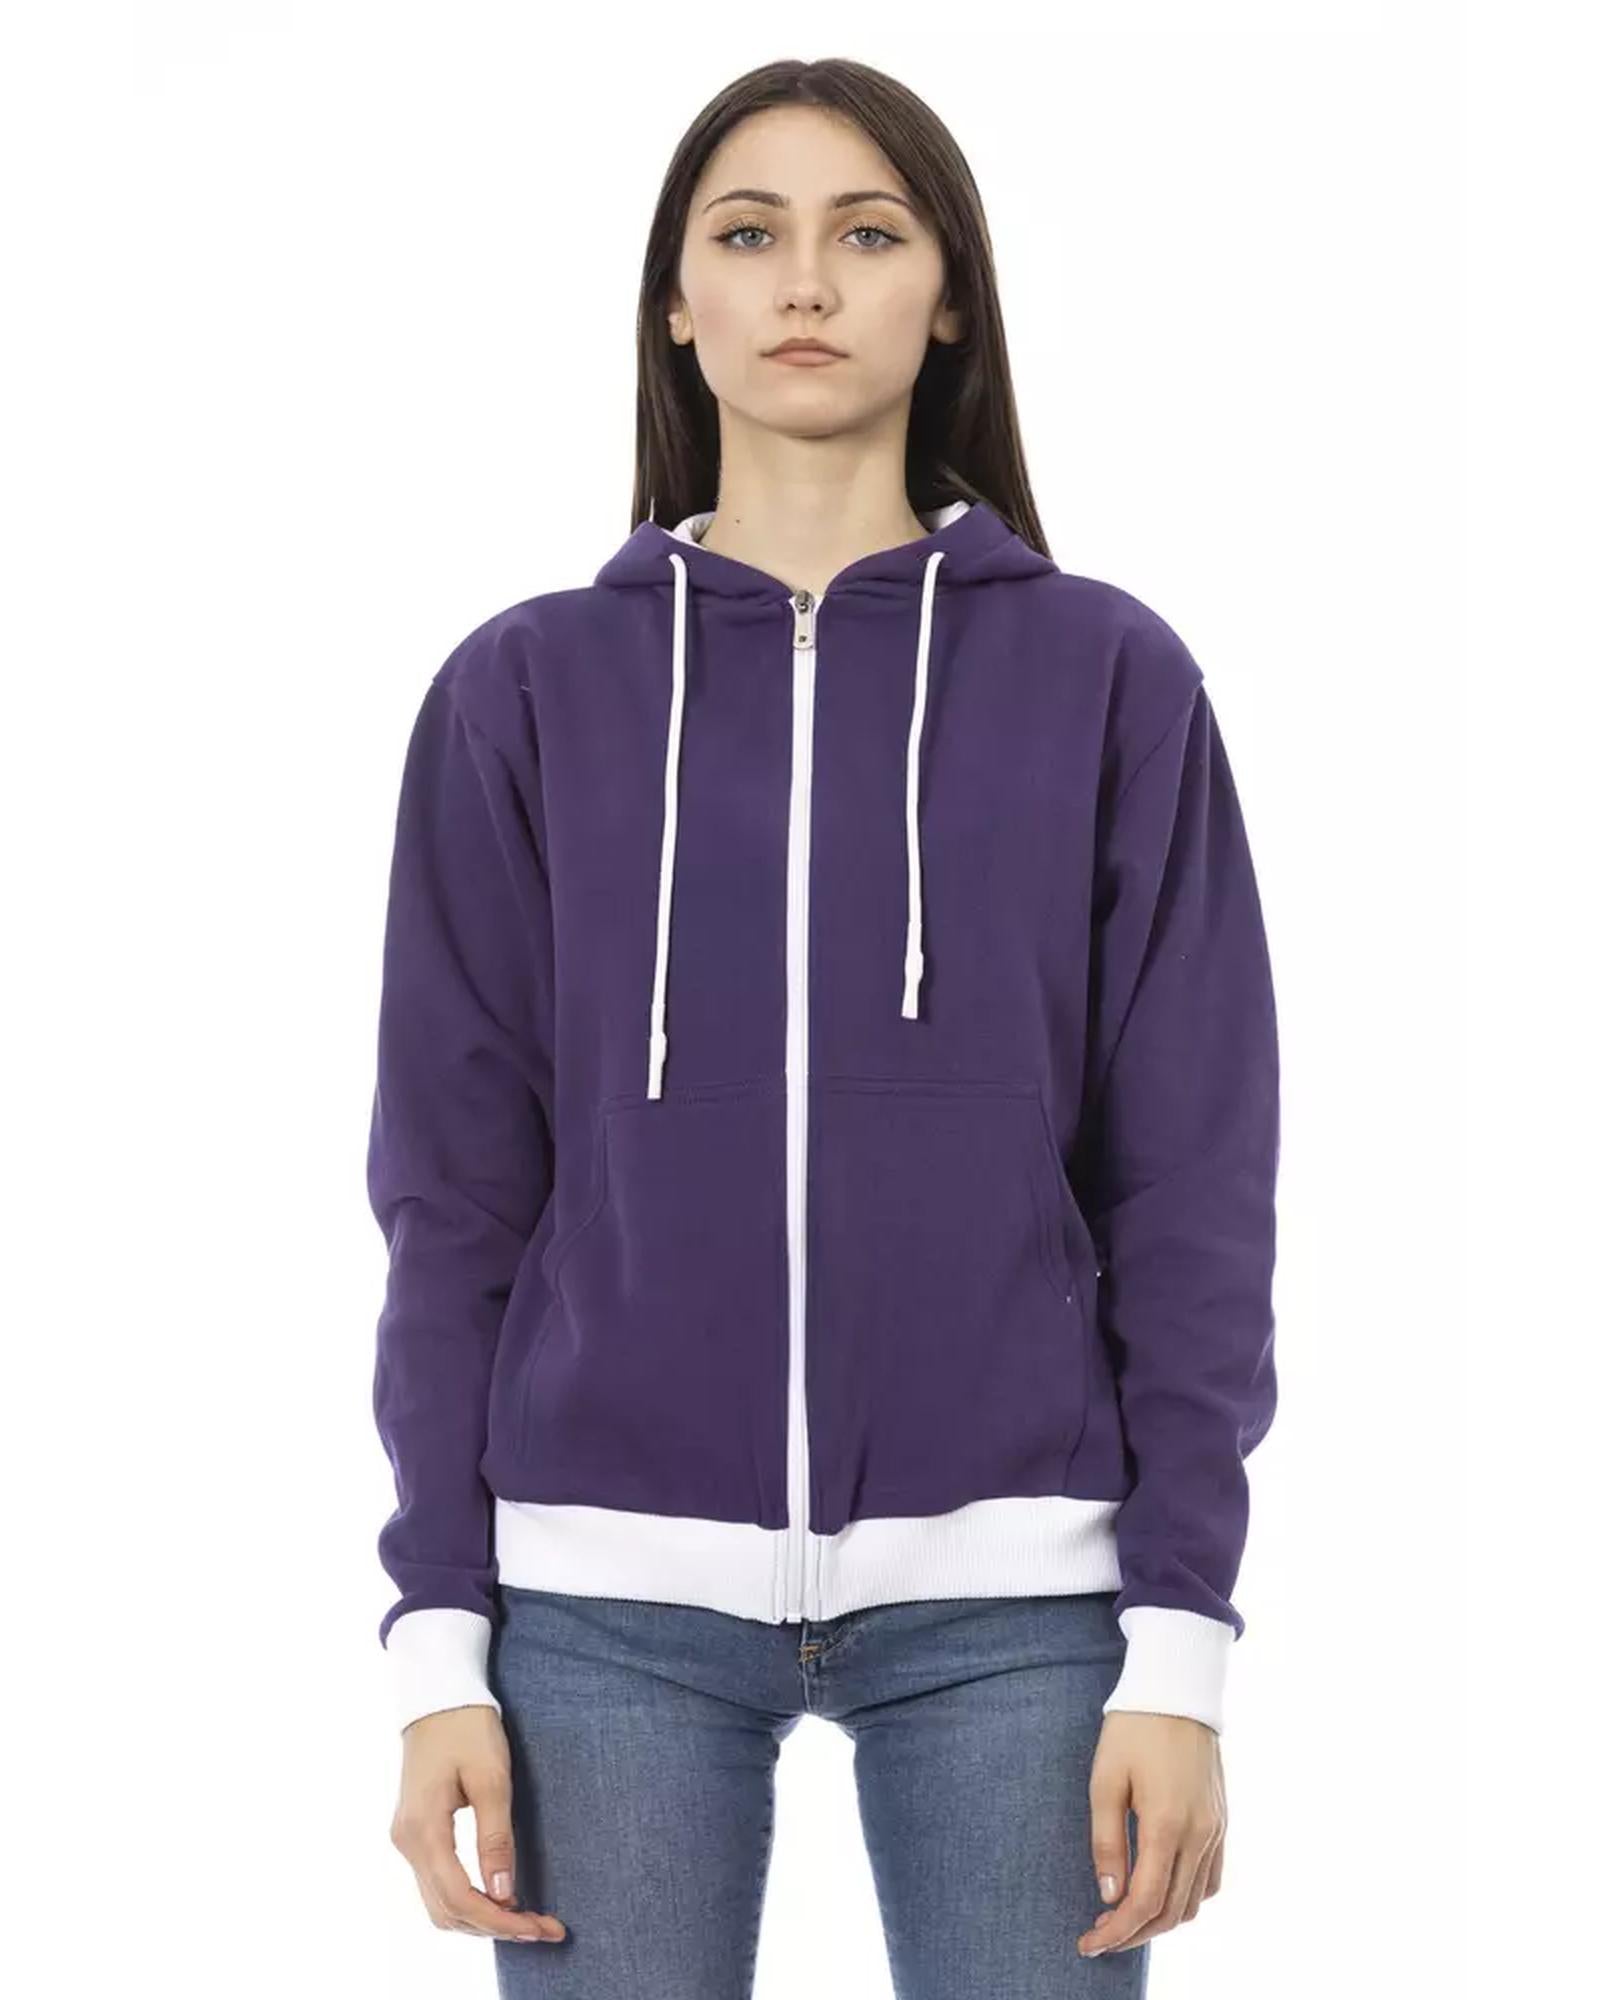 Double Color Adjustable Hooded Sweater M Women